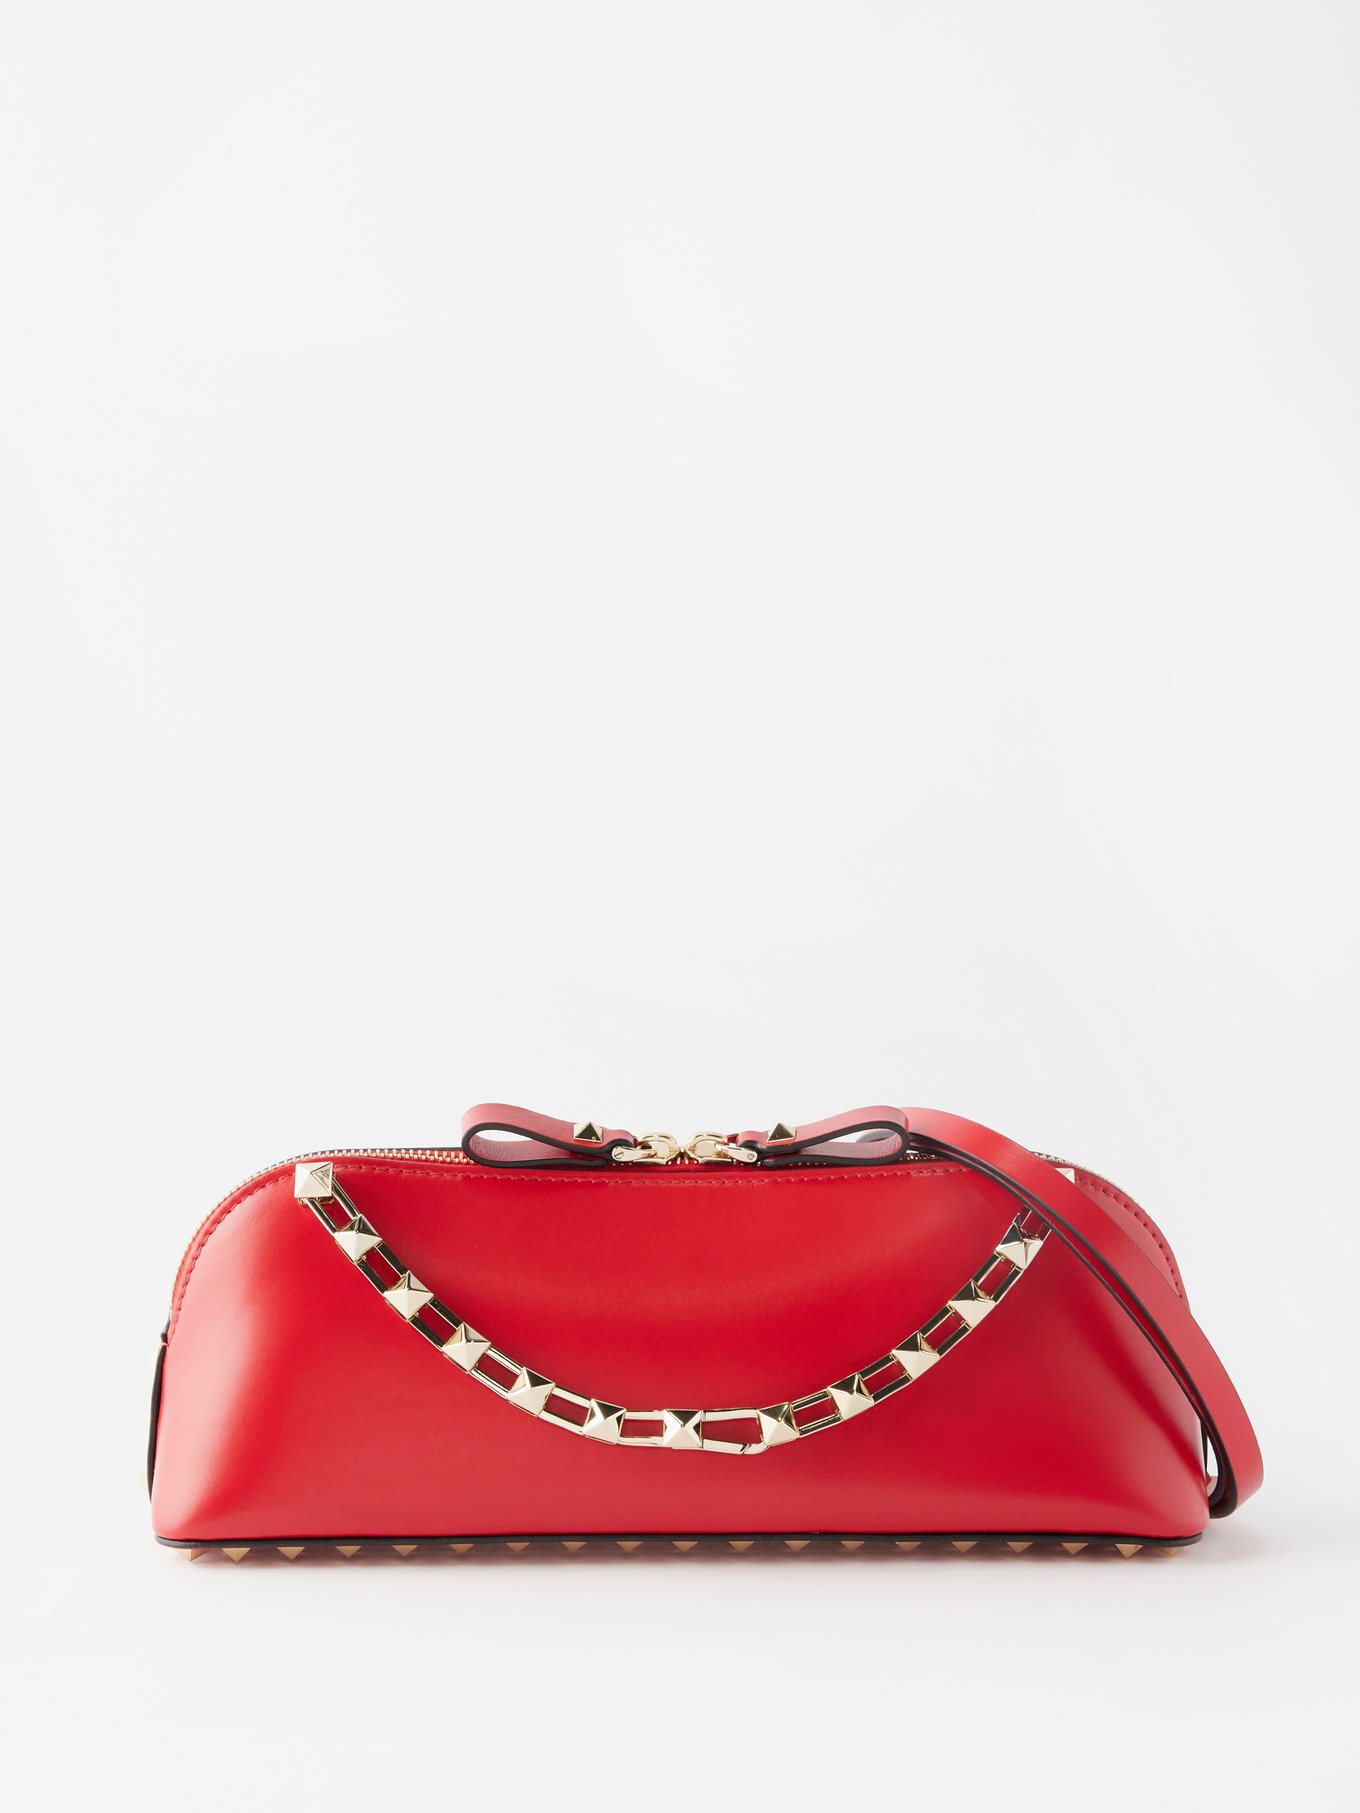 Valentino, Bags, Valentino New Valentino Red Mini Studded Pouch Makeup Bag